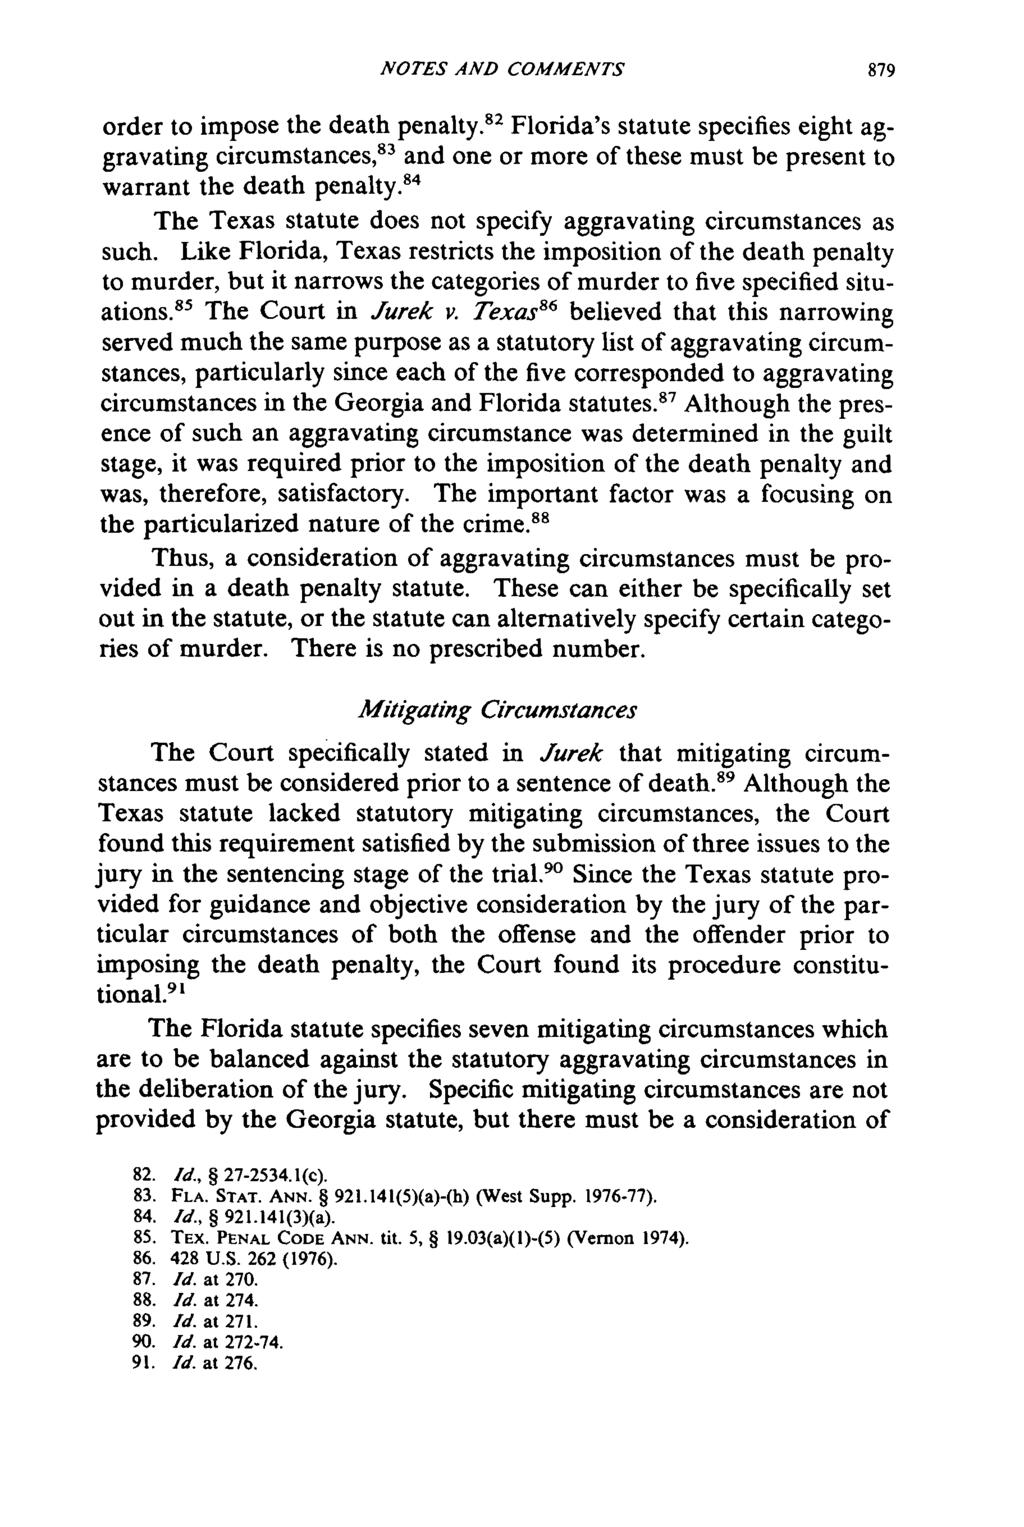 NOTES AND COMMENTS order to impose the death penalty. 2 Florida's statute specifies eight aggravating circumstances, 83 and one or more of these must be present to warrant the death penalty.